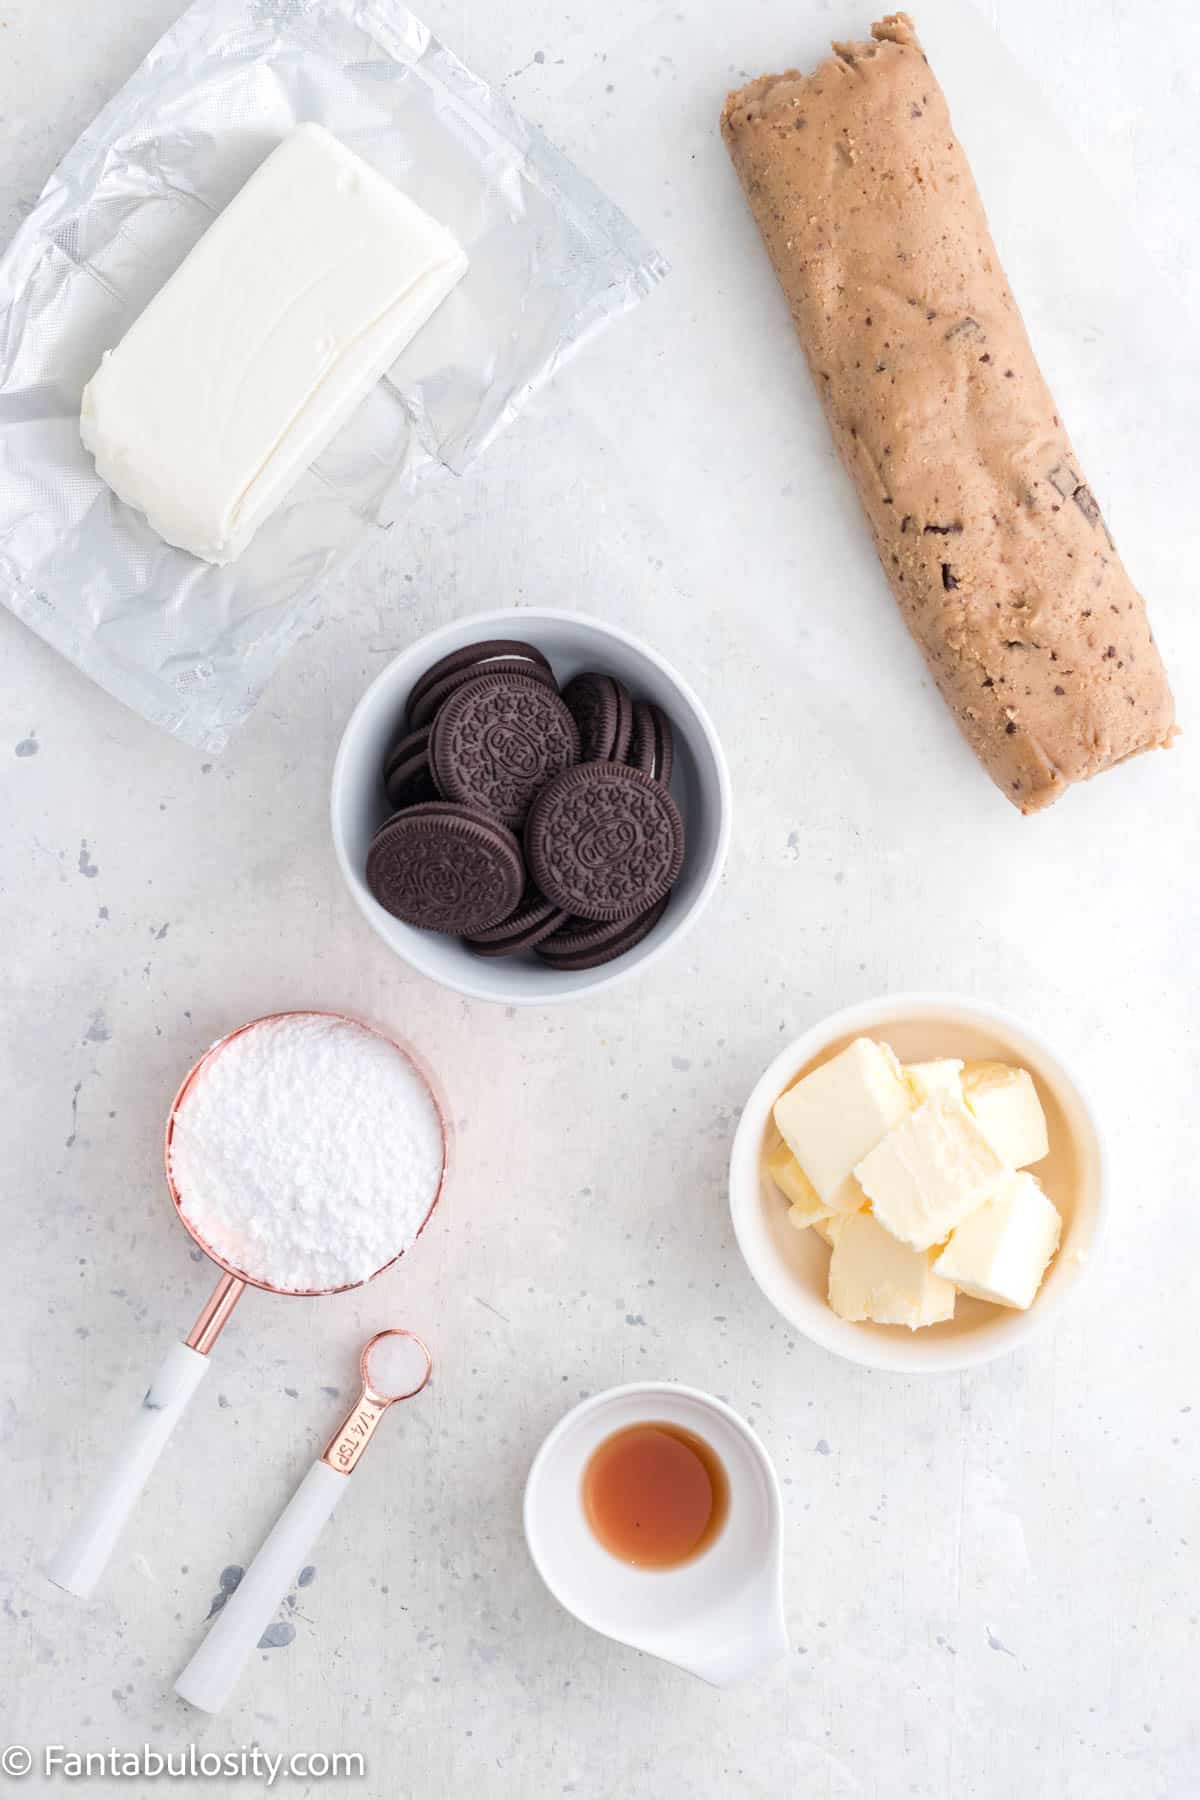 The ingredients used to make an Oreo pizza are laid out on a white marble background